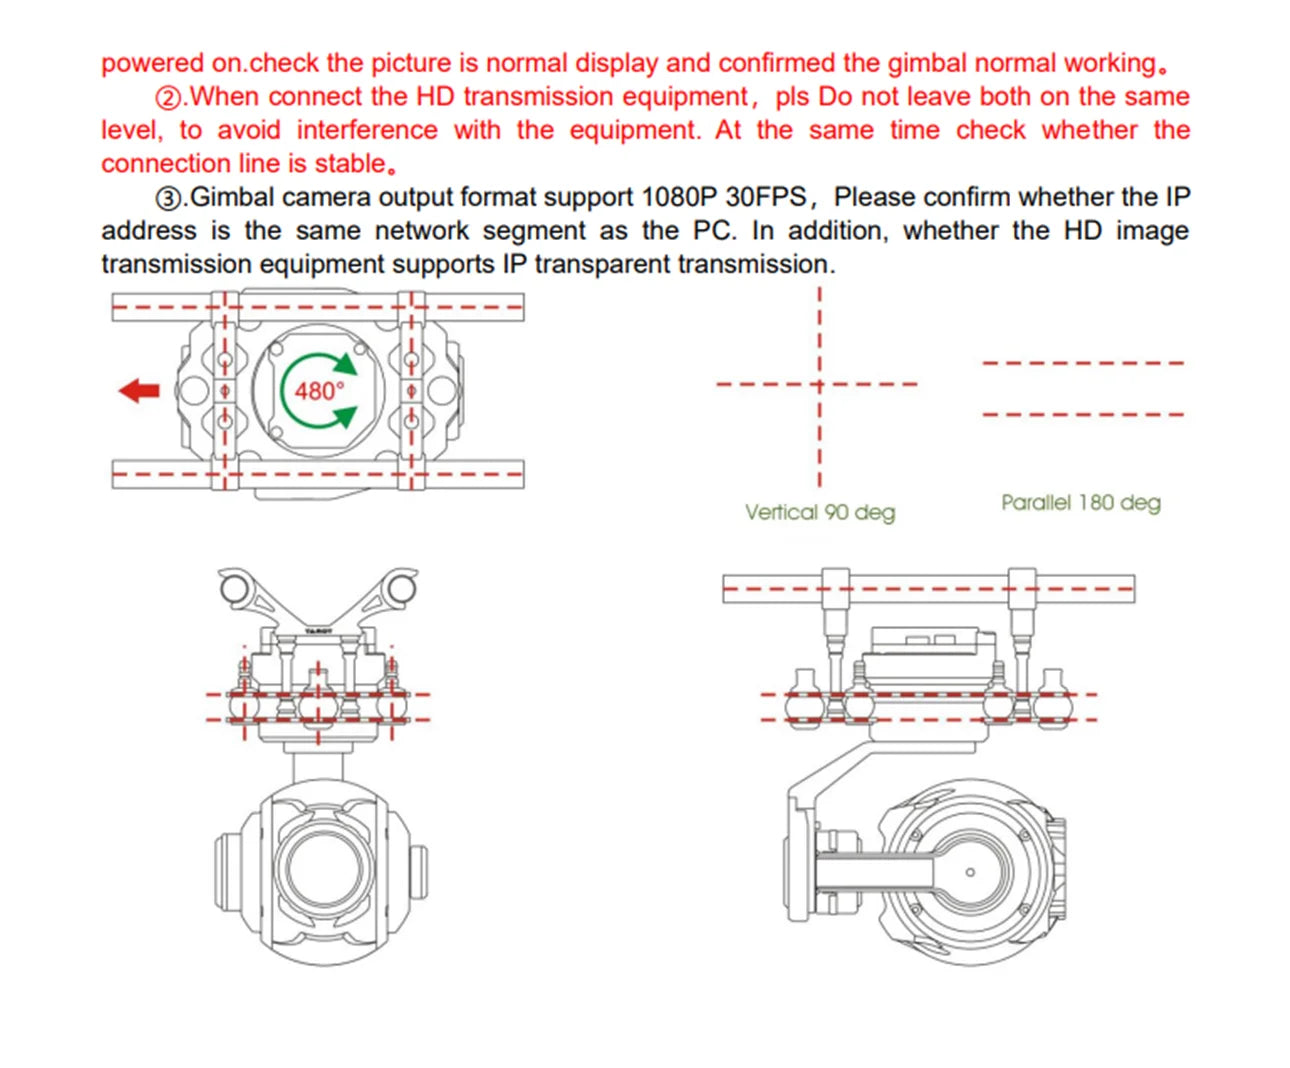 gimbal camera output format support 1080P 30FPS_ Please confirm whether the